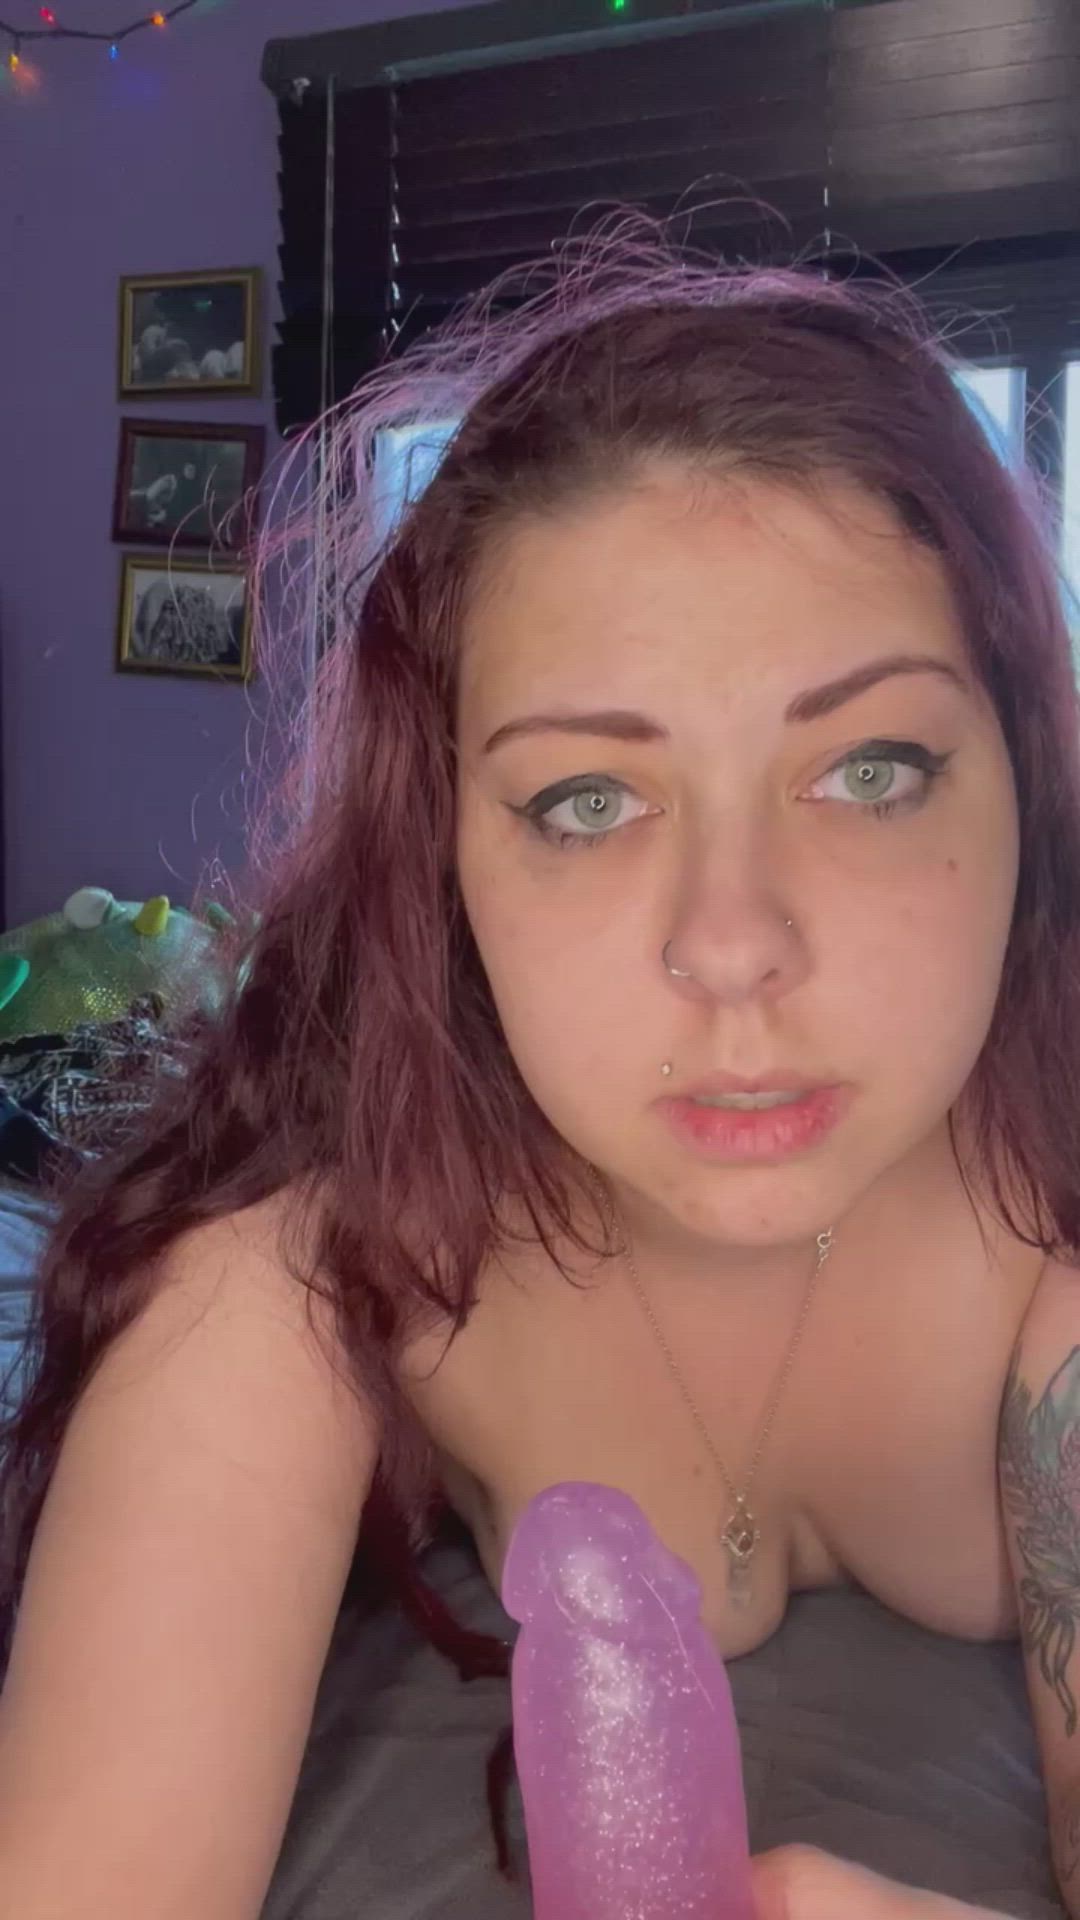 Amateur porn video with onlyfans model morganalovecraft <strong>@witchofsaturn</strong>